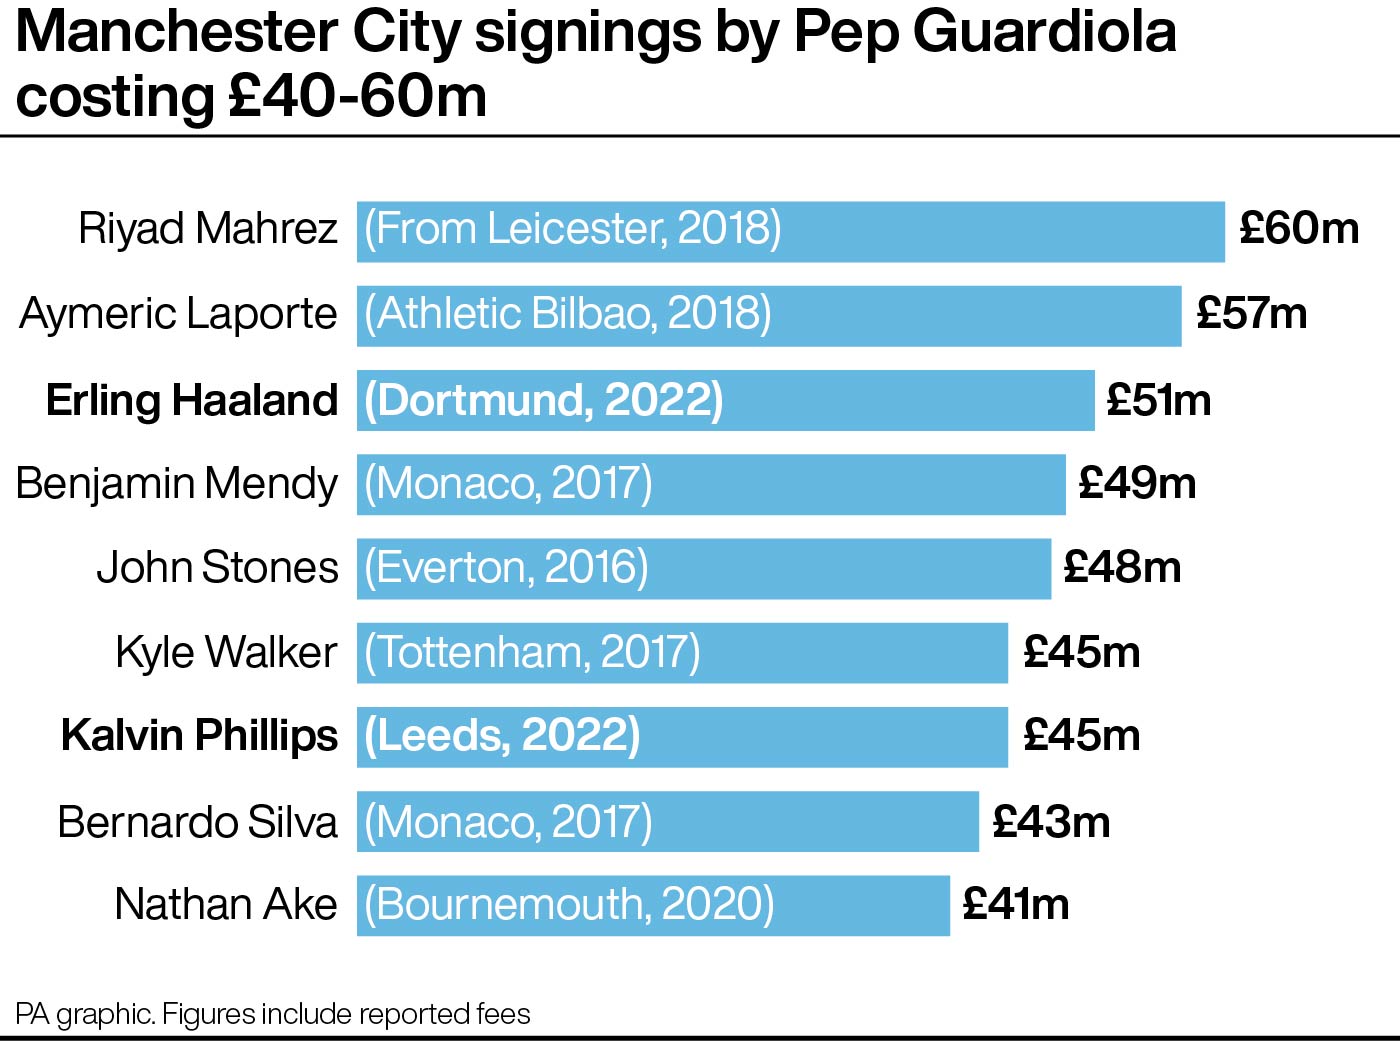 Manchester City signings by Pep Guardiola costing £40-60m